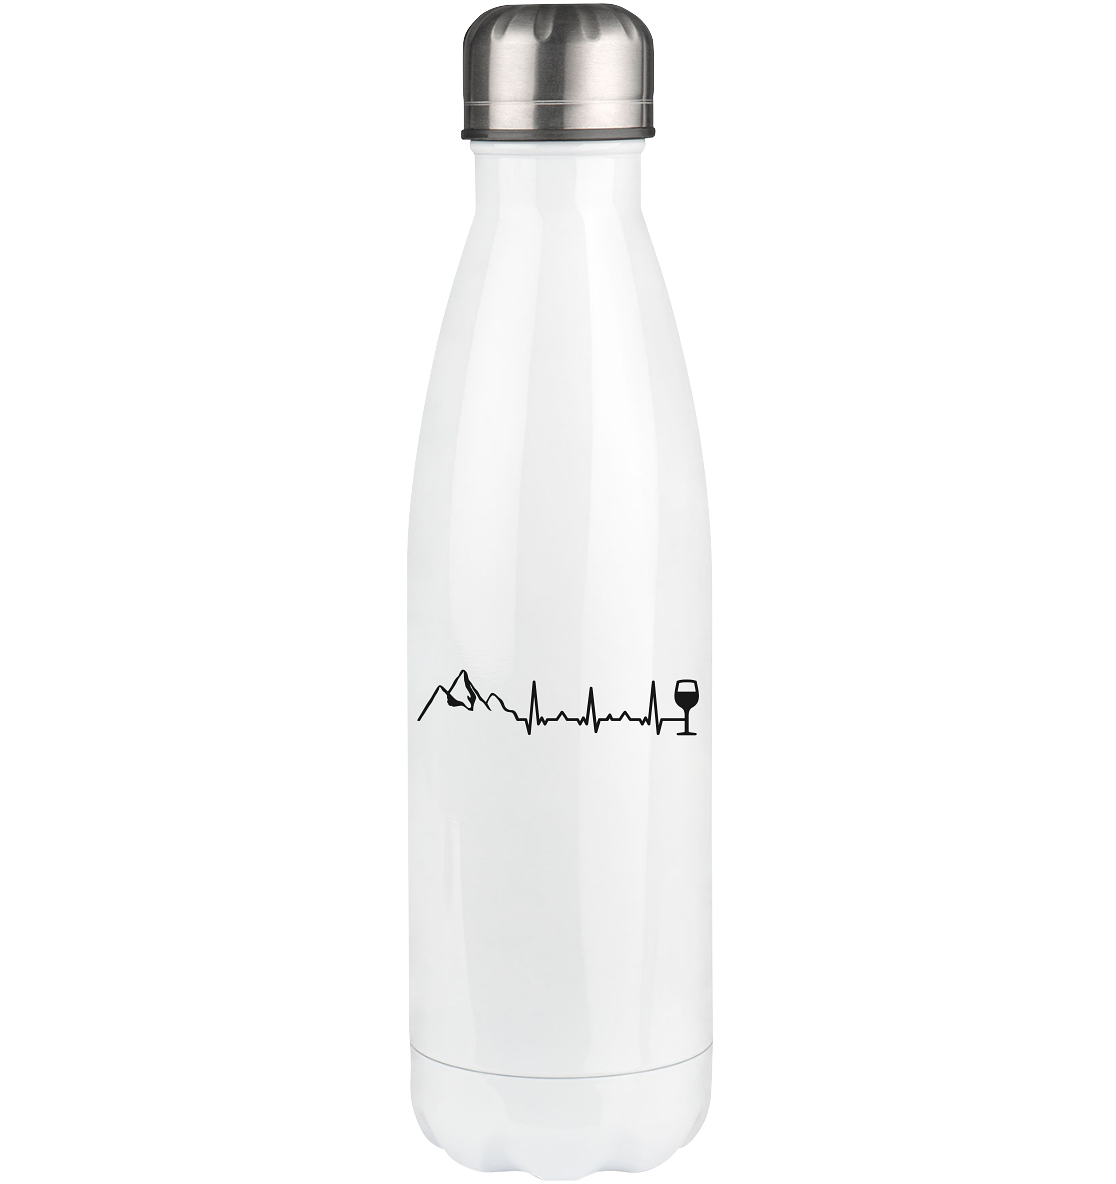 Heartbeat Wine and Mountain - Edelstahl Thermosflasche berge 500ml